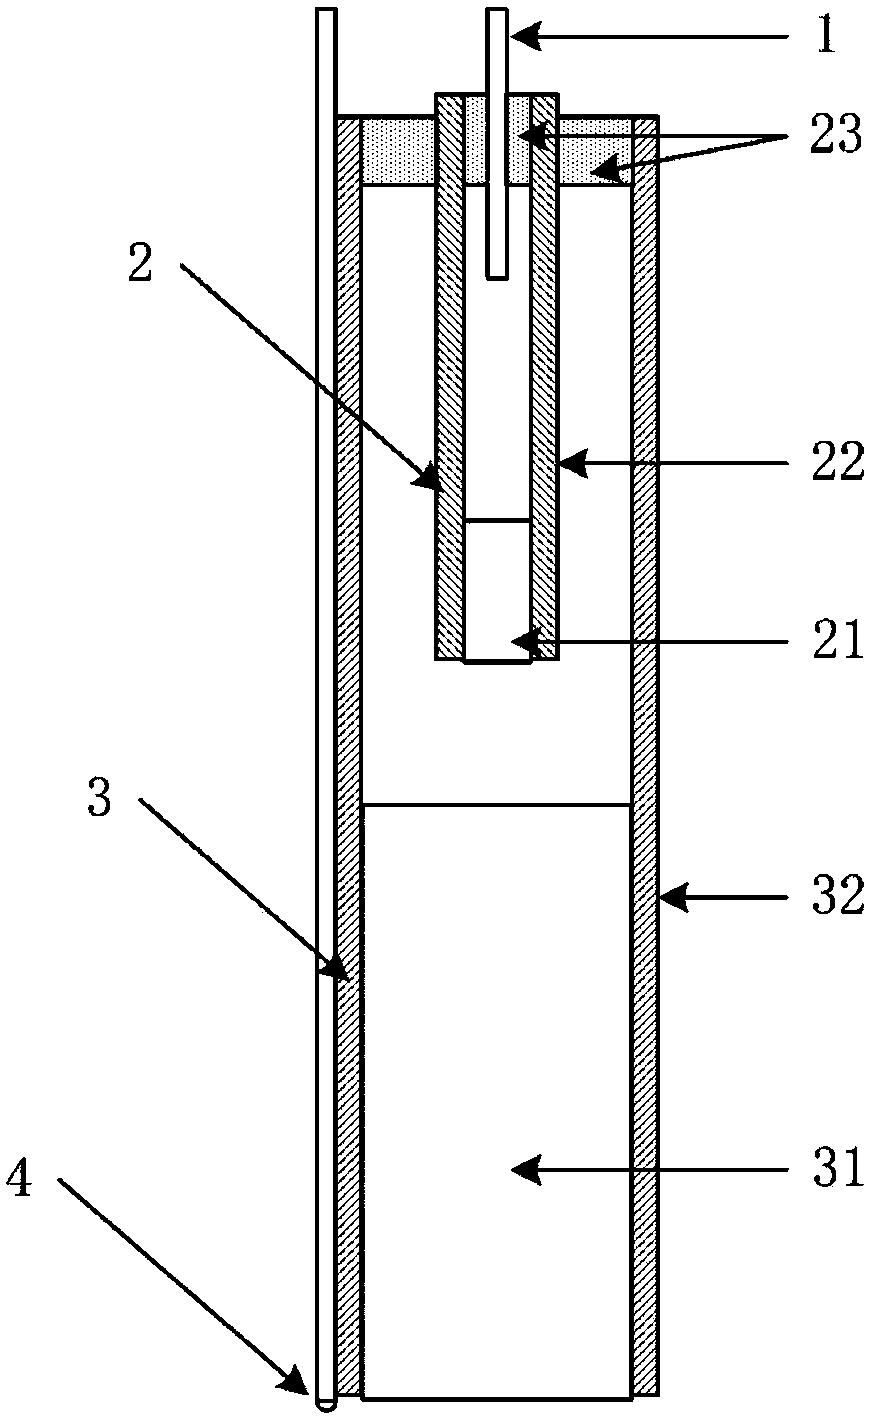 Micro photoacoustic microscopic imaging head, production method and system consisting of micro photoacoustic microscopic imaging head